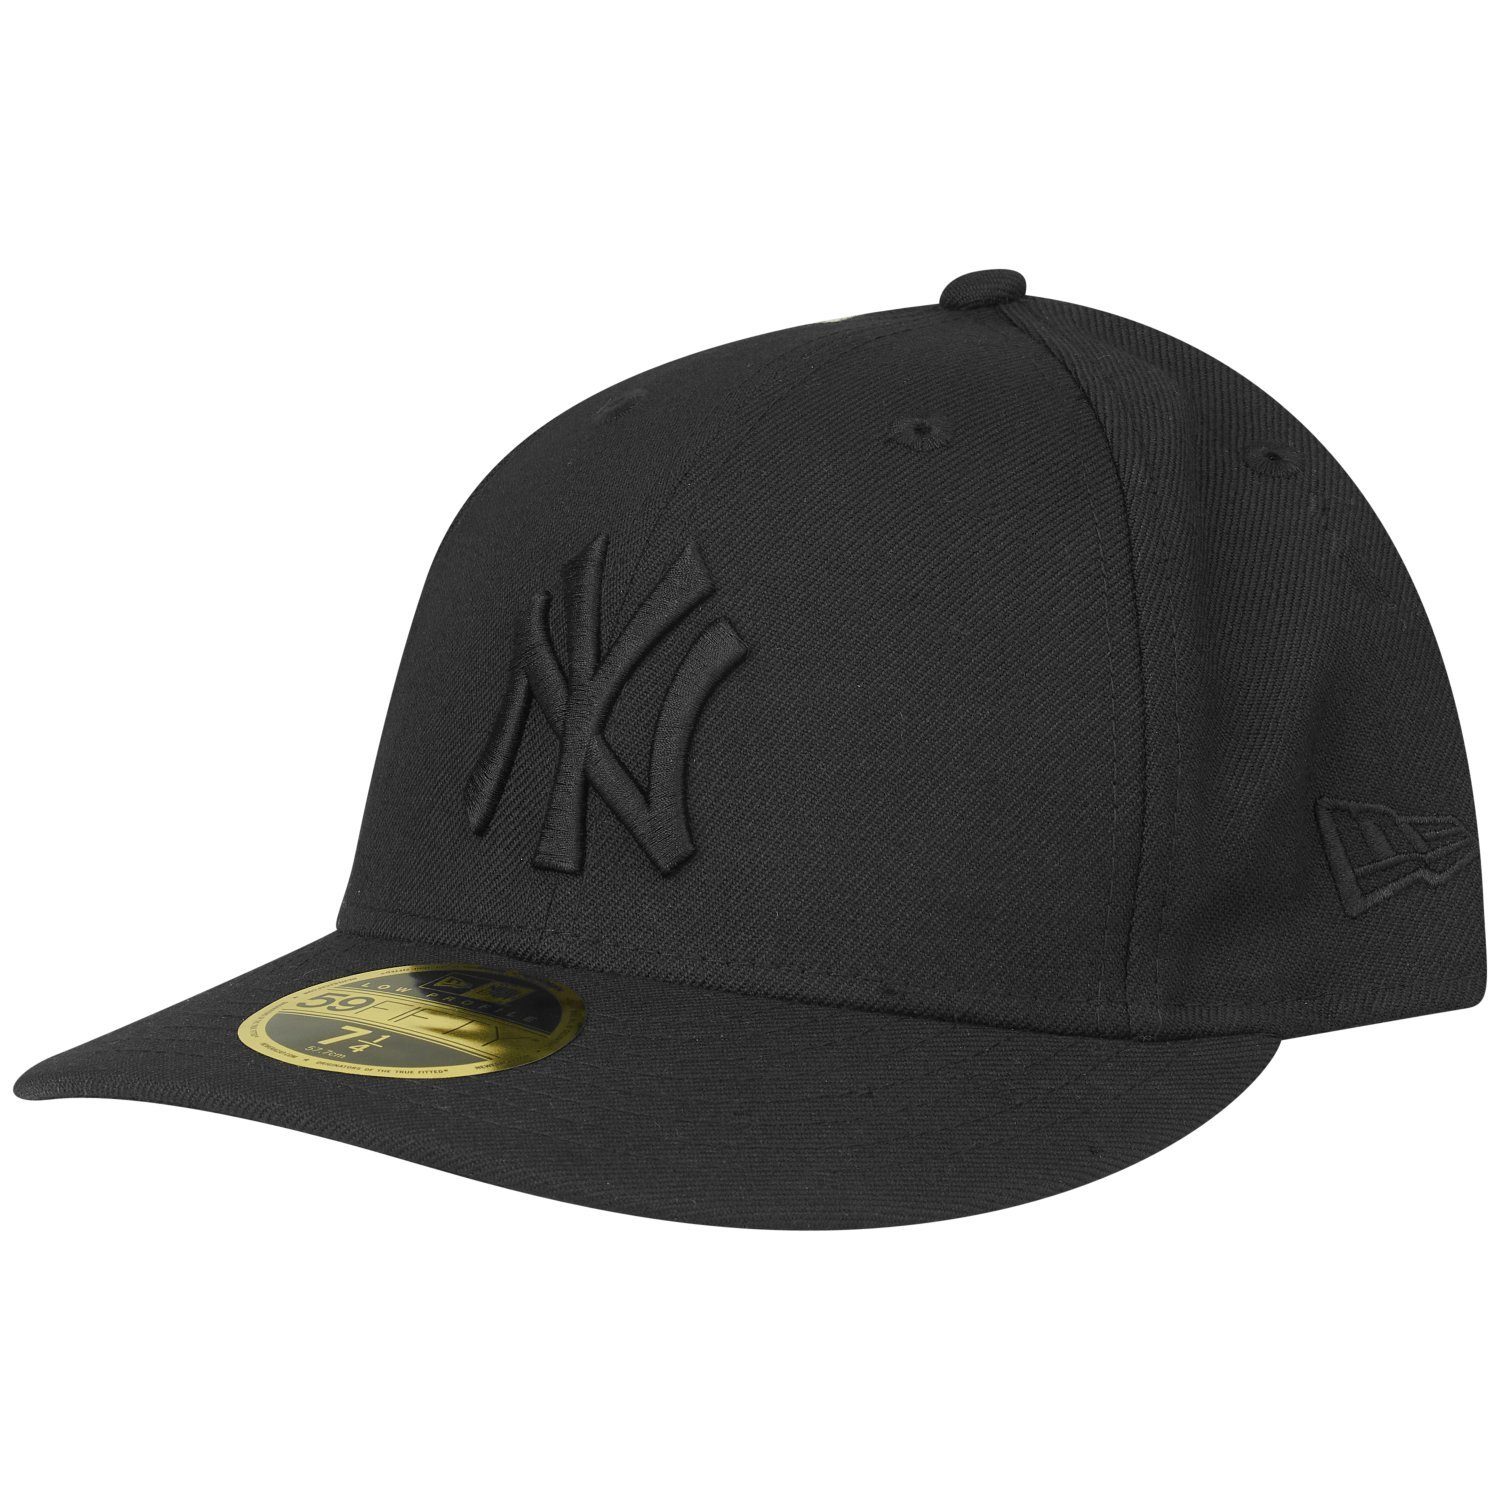 New Era Fitted Cap 59Fifty Low Profile New York Yankees